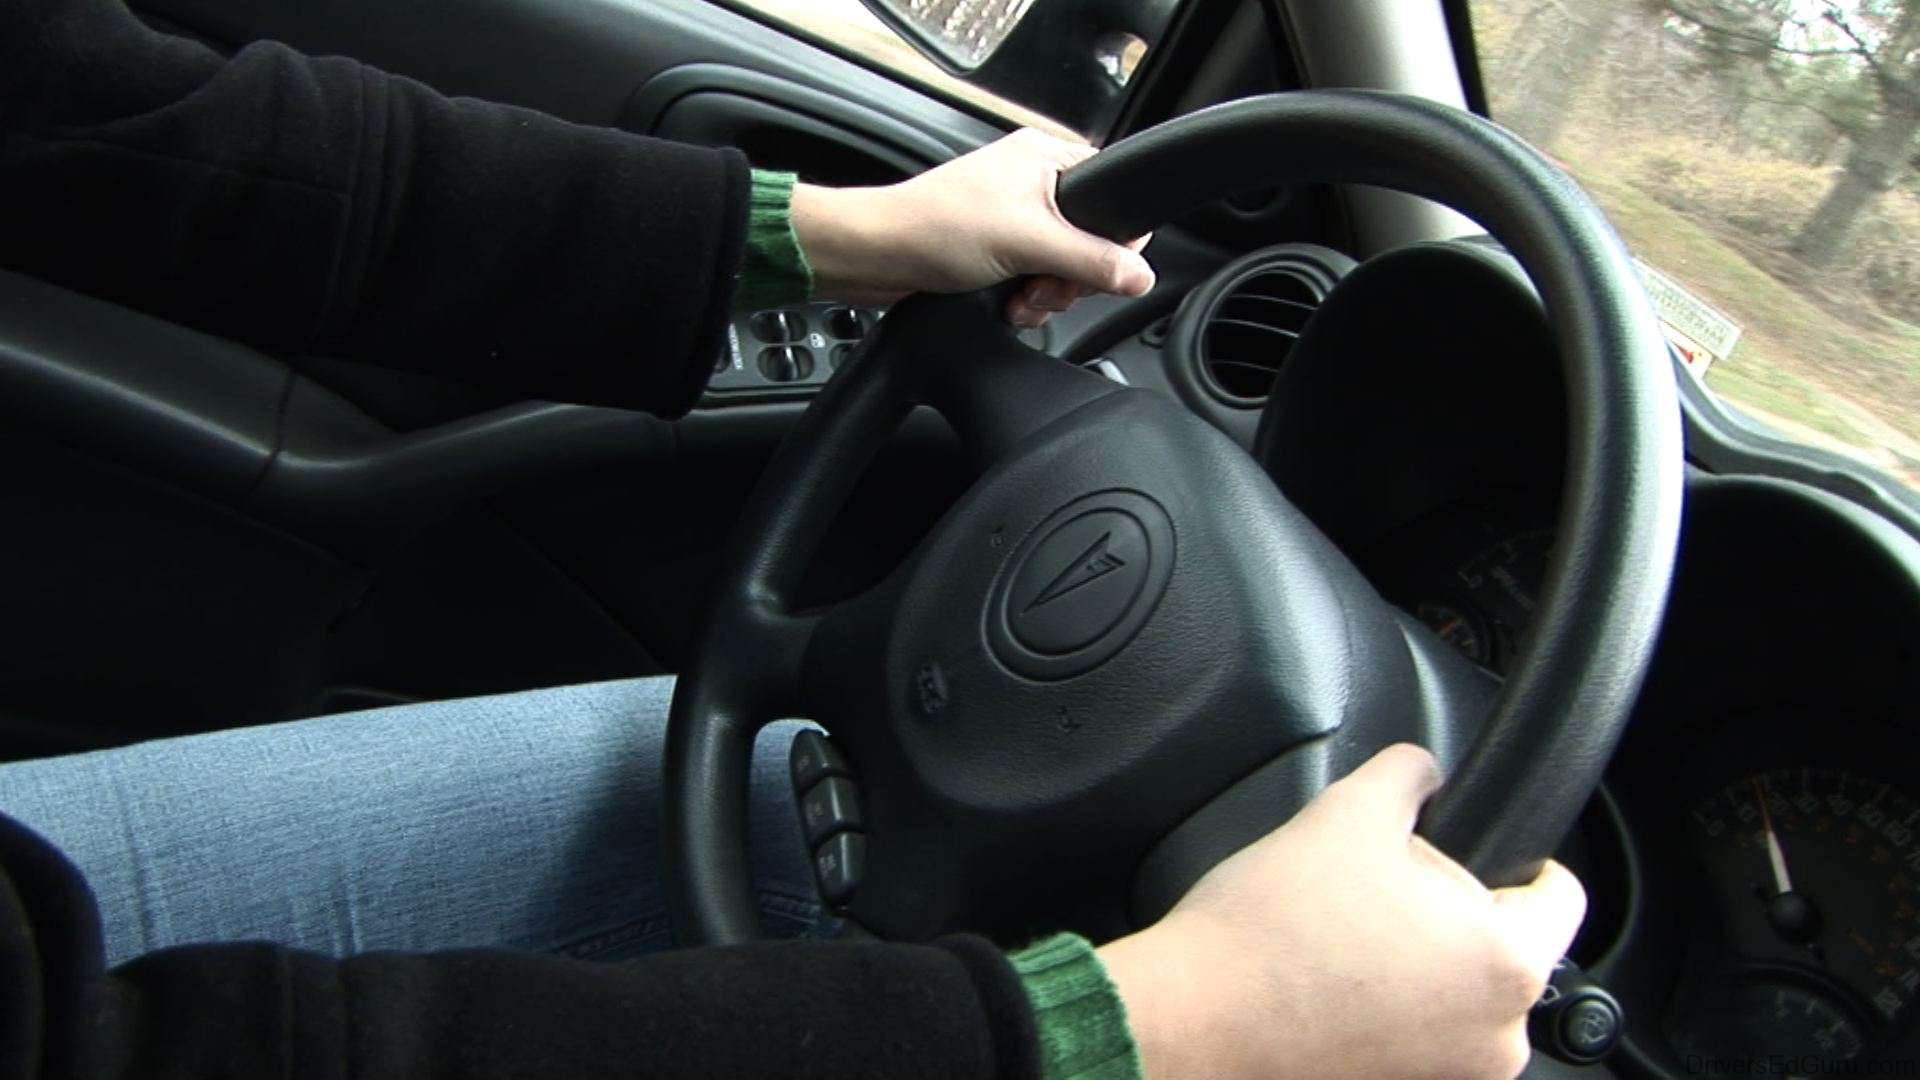 Both hands on the wheel | Phil Ebersole's Blog